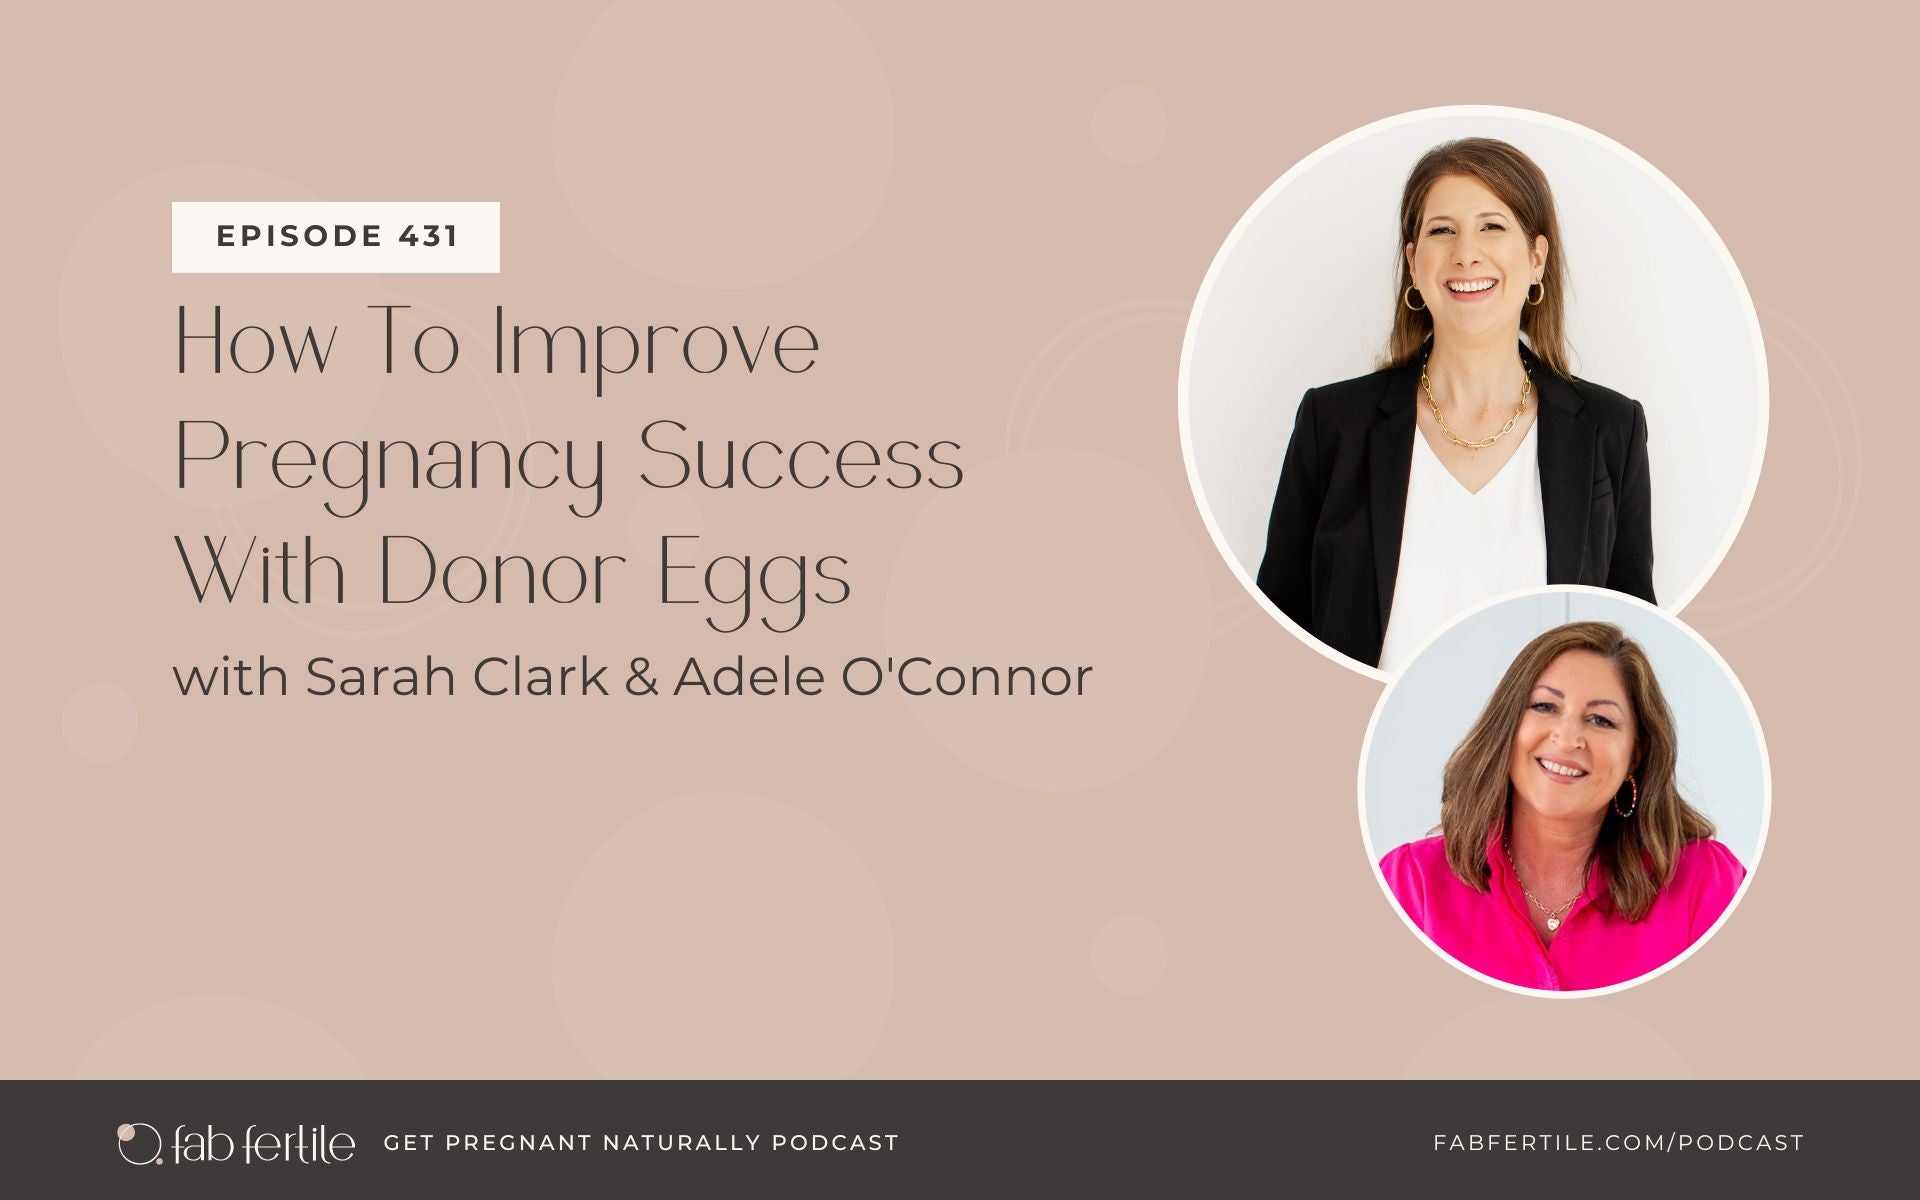 How To Improve Pregnancy Success With Donor Eggs with Adele O'Connor